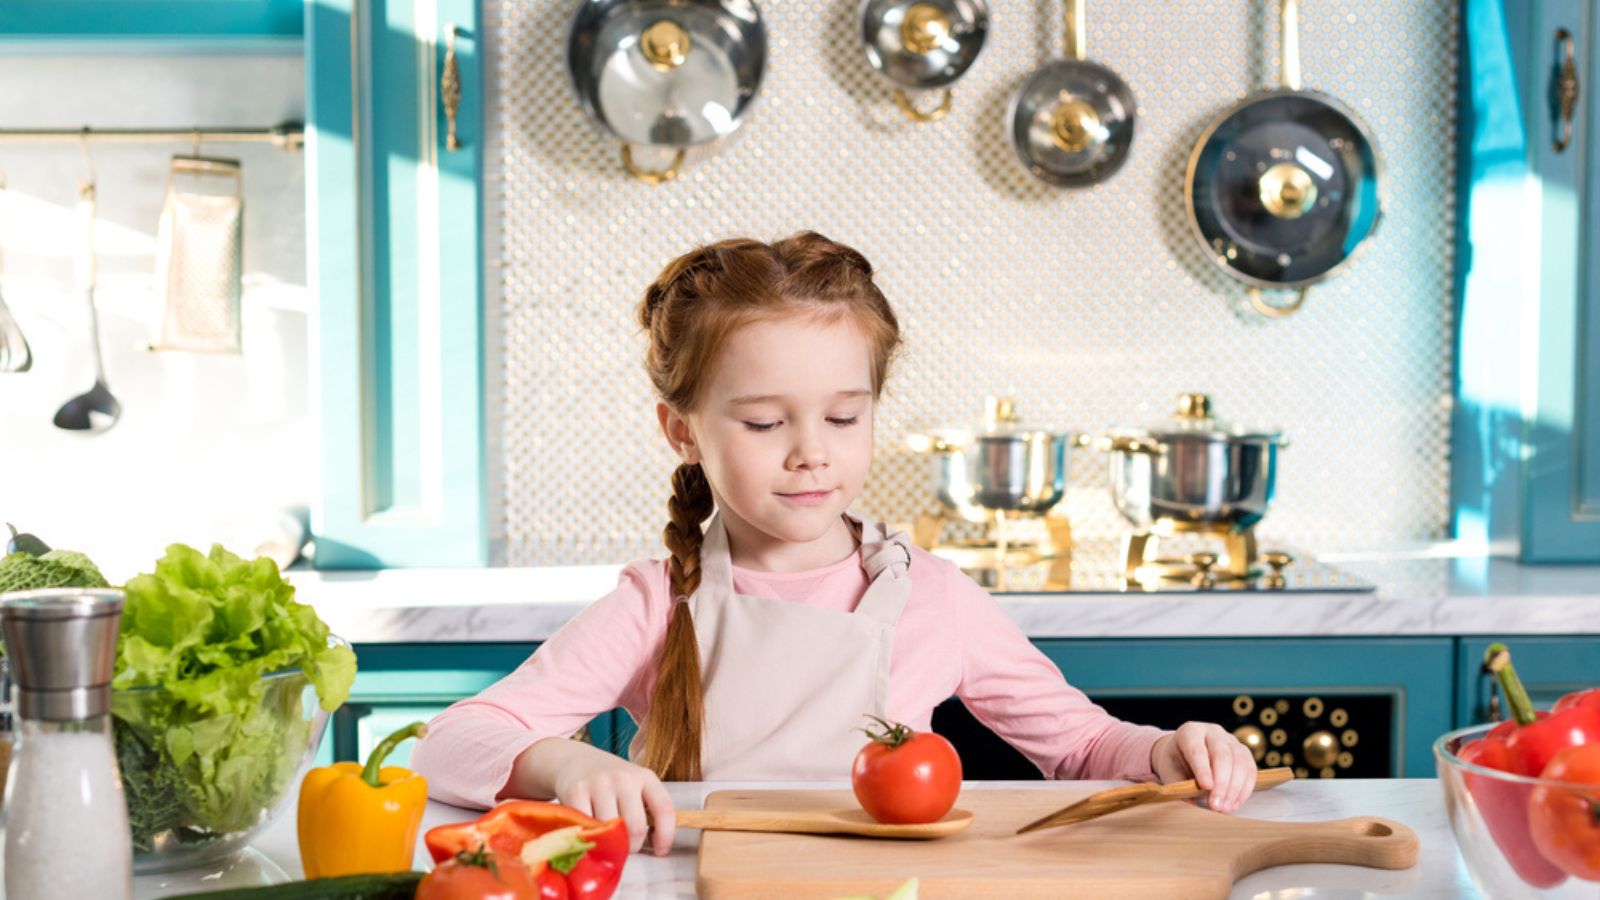 Adorable little girl in apron cooking in kitchen